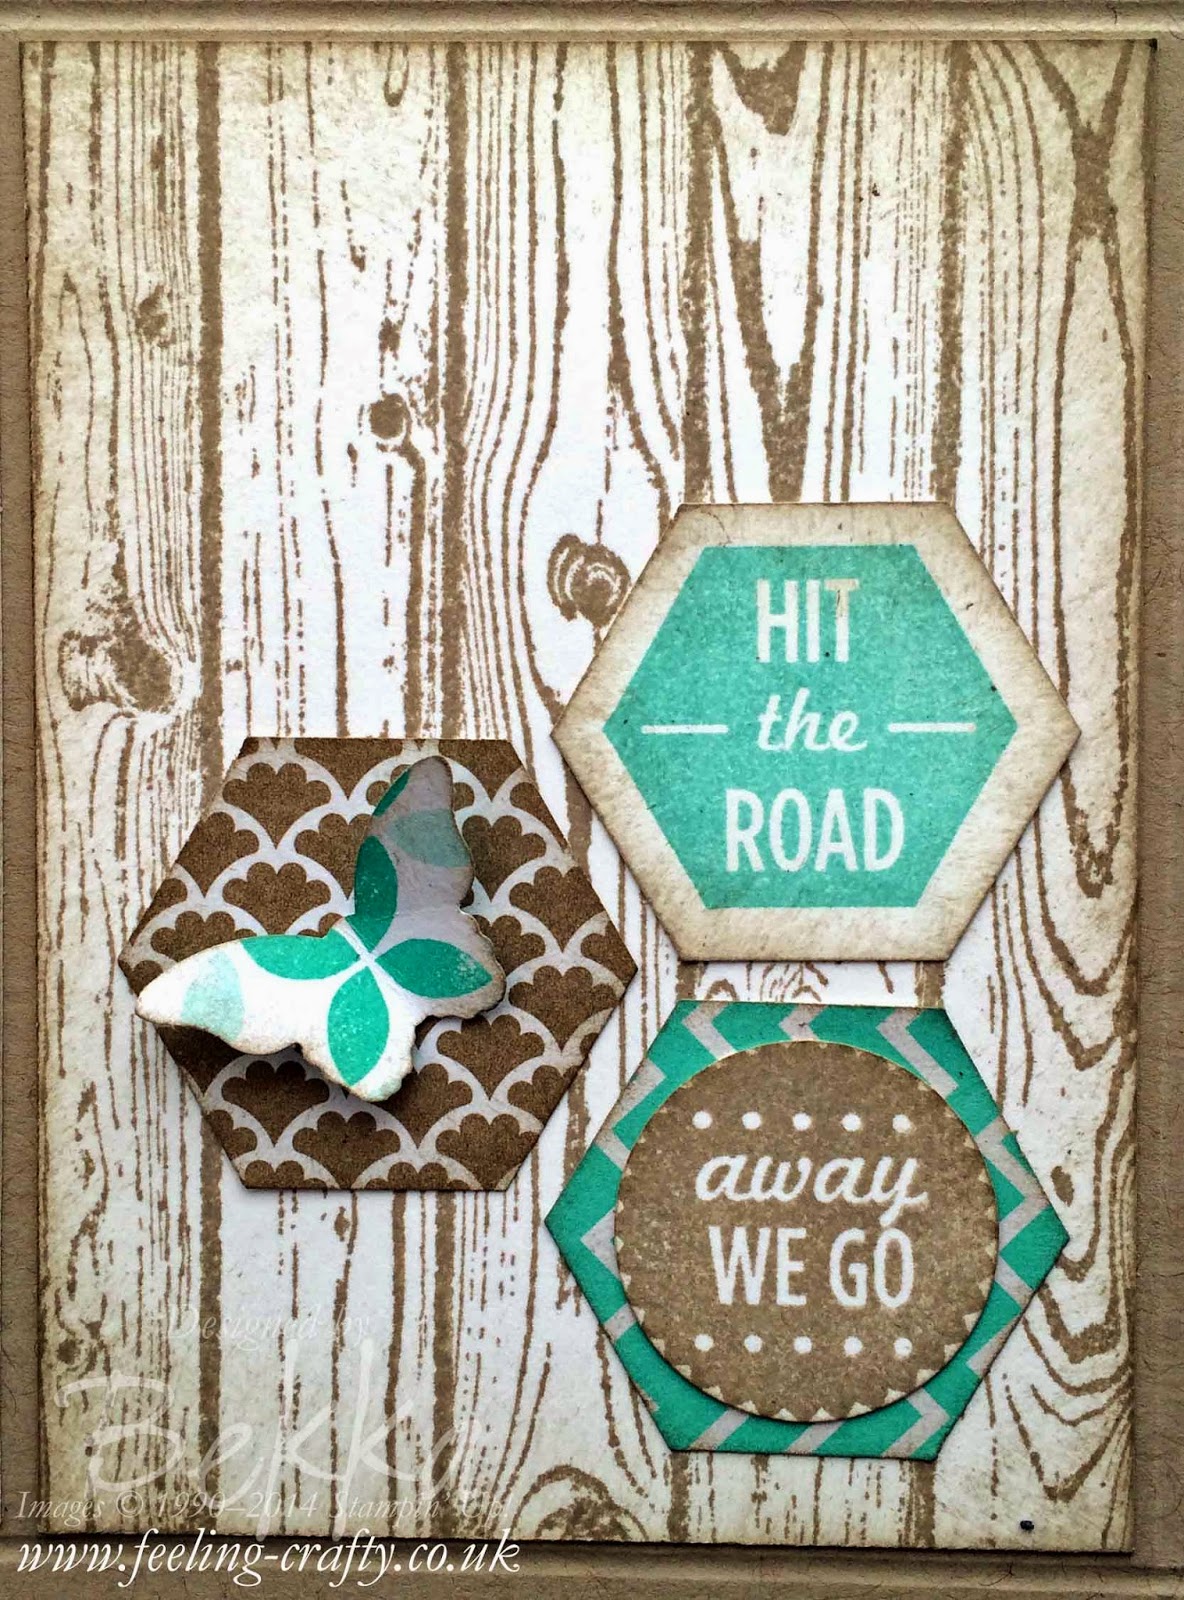 Project Life Inspired Scrapbook Page using Stampin' Up! Products - real thing coming to the UK soon check it out here!